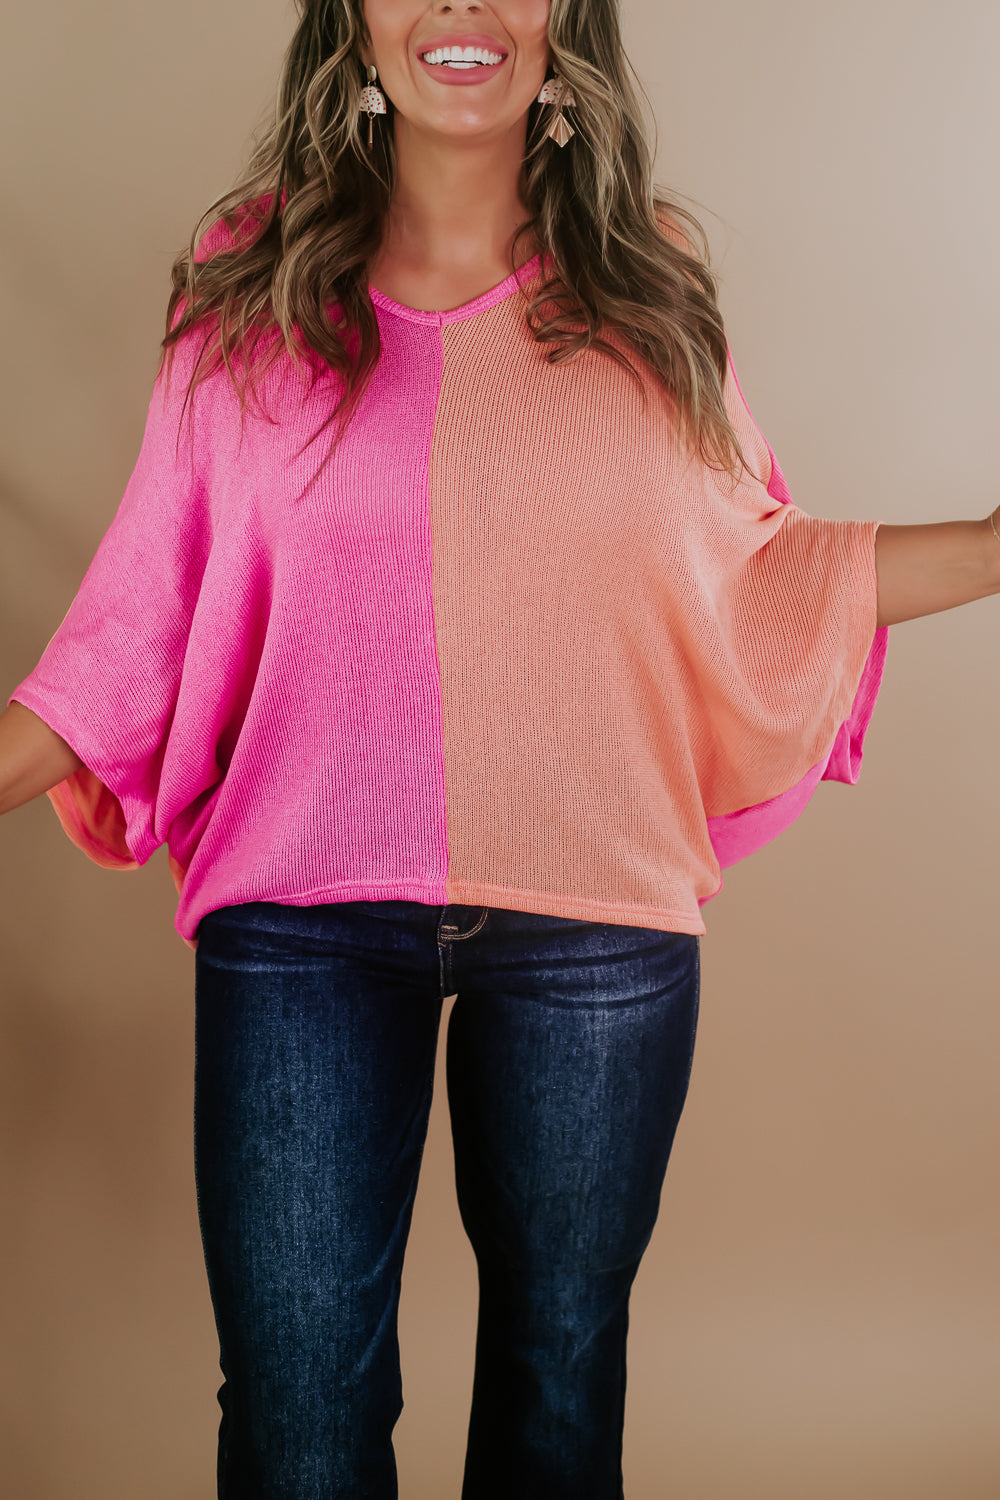 New Groove Split Top, Pink/Apricot